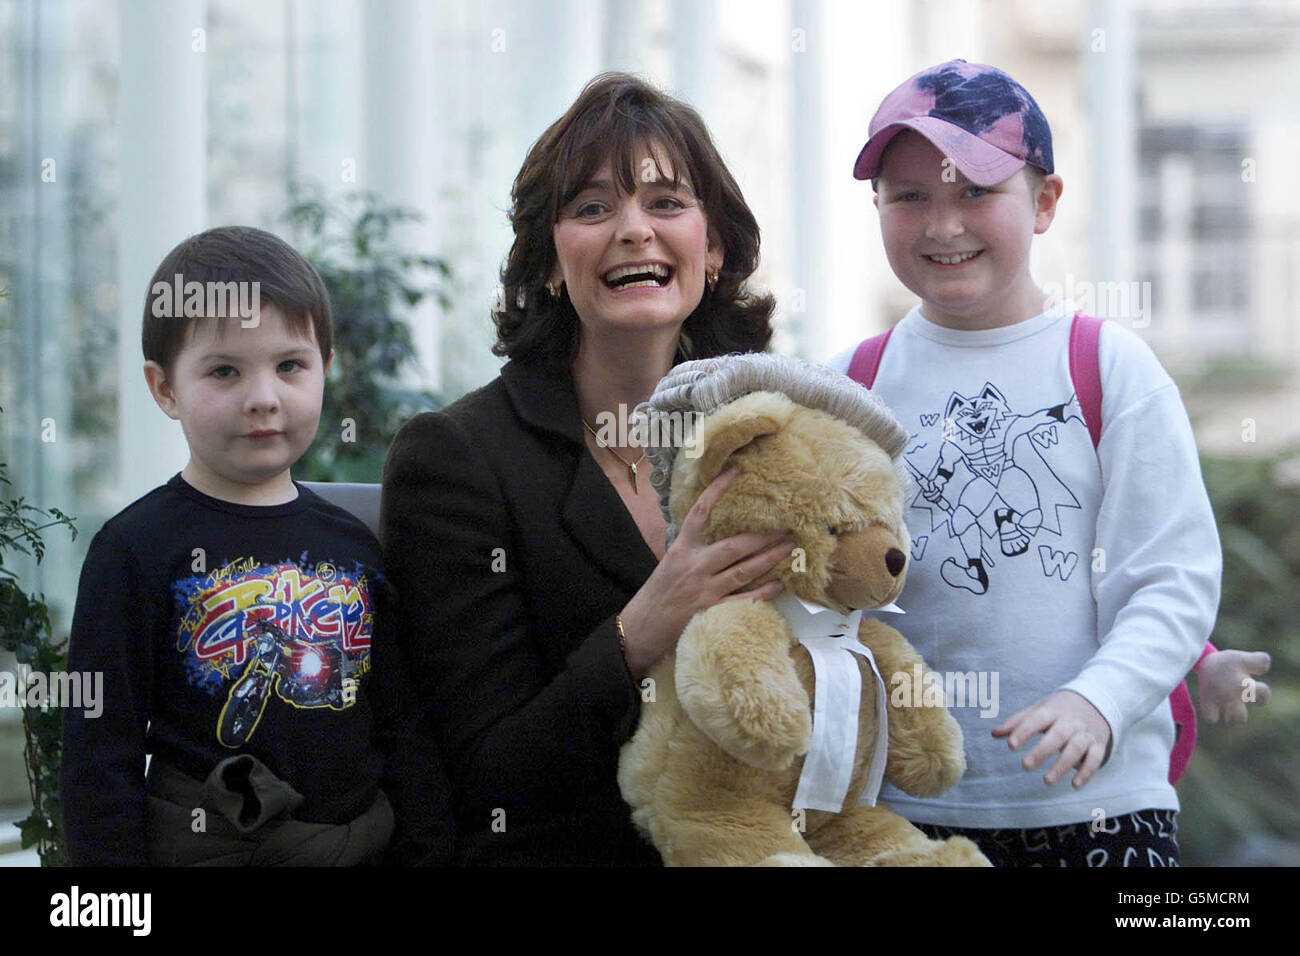 A delighted Cherie Booth, wife of British Prime Minister, Tony Blair, receives a teddy bear today from Cory Moore aged 6 (left) and Isobel Pearson Evans aged 8 both from The National Childrens Hospital, during her visit to Dublin. *Later Mrs Blair will be made an honorary bencher of the Kings Inn, an institution which trains barristers in Ireland. Stock Photo